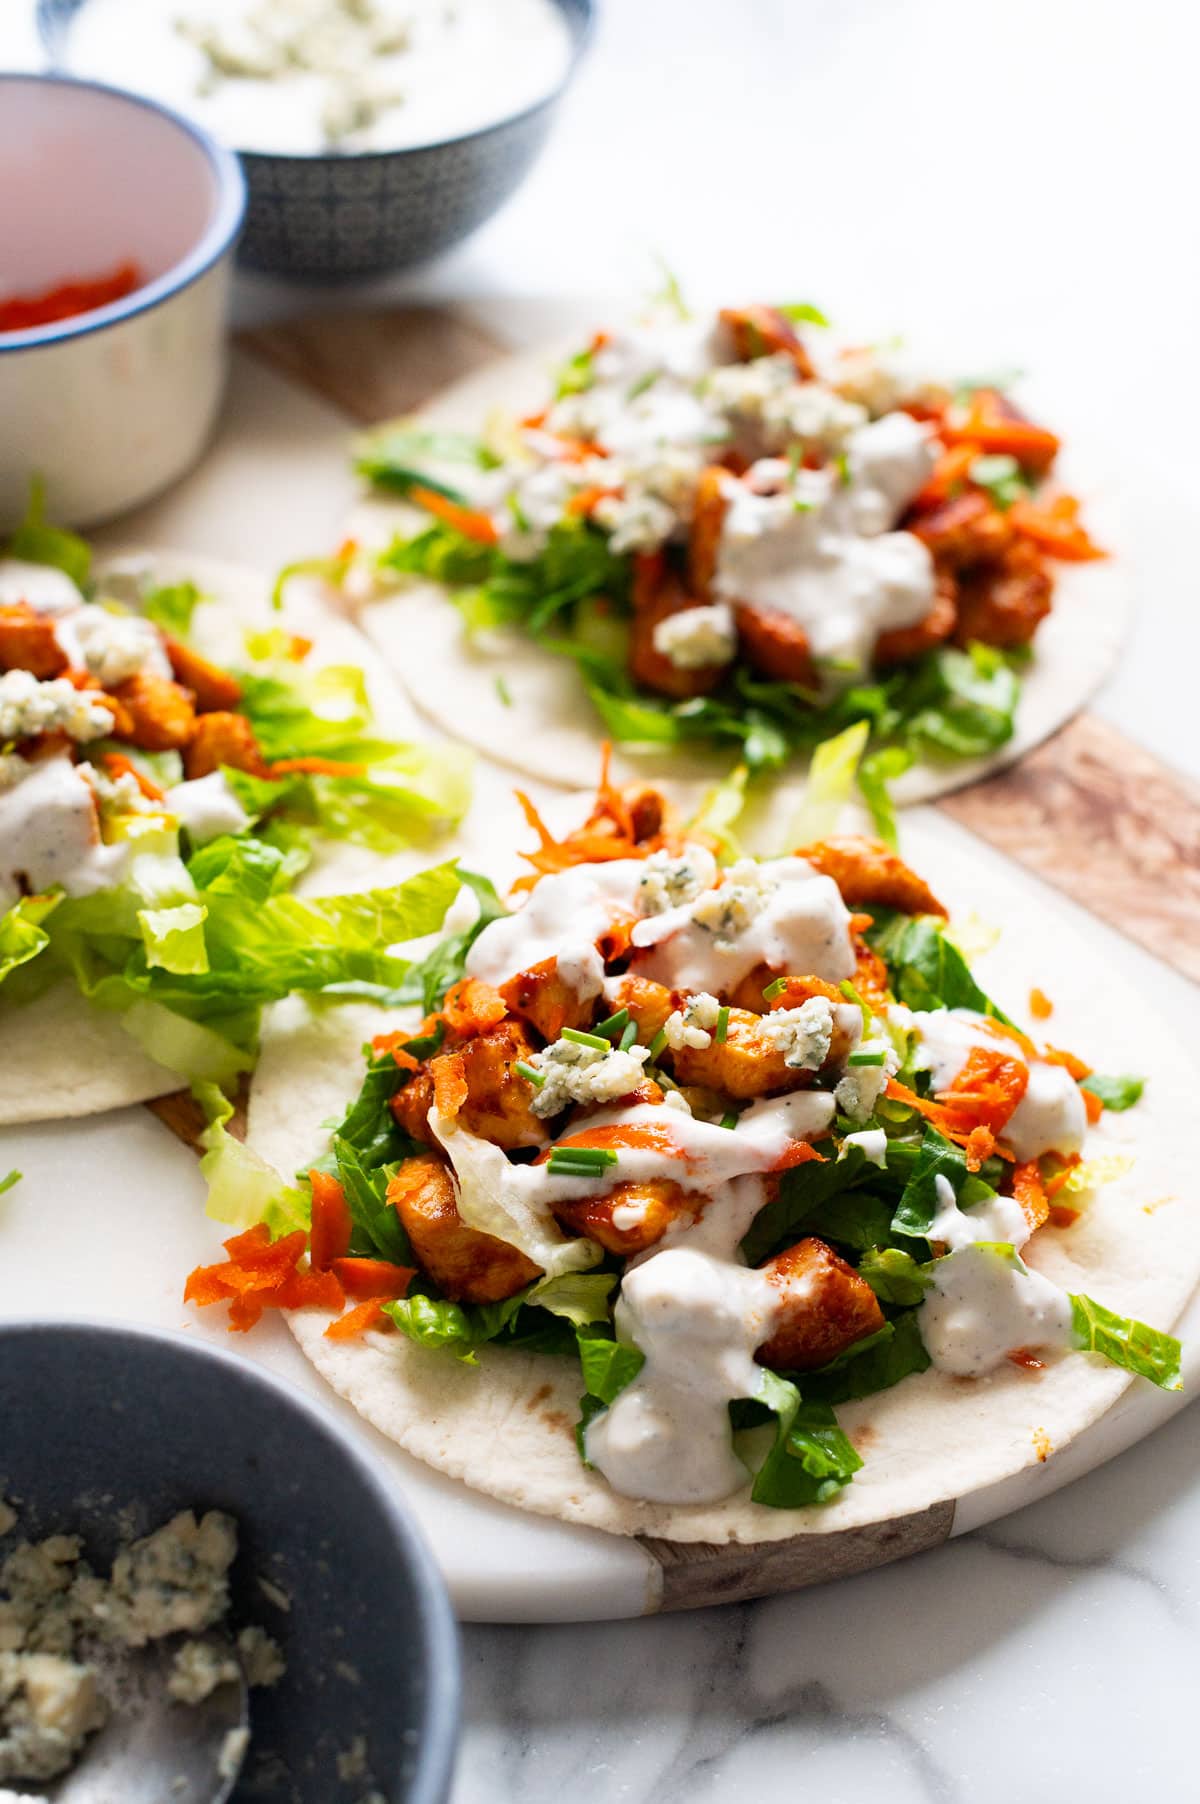 Buffalo chicken tacos drizzled with blue cheese dressing.